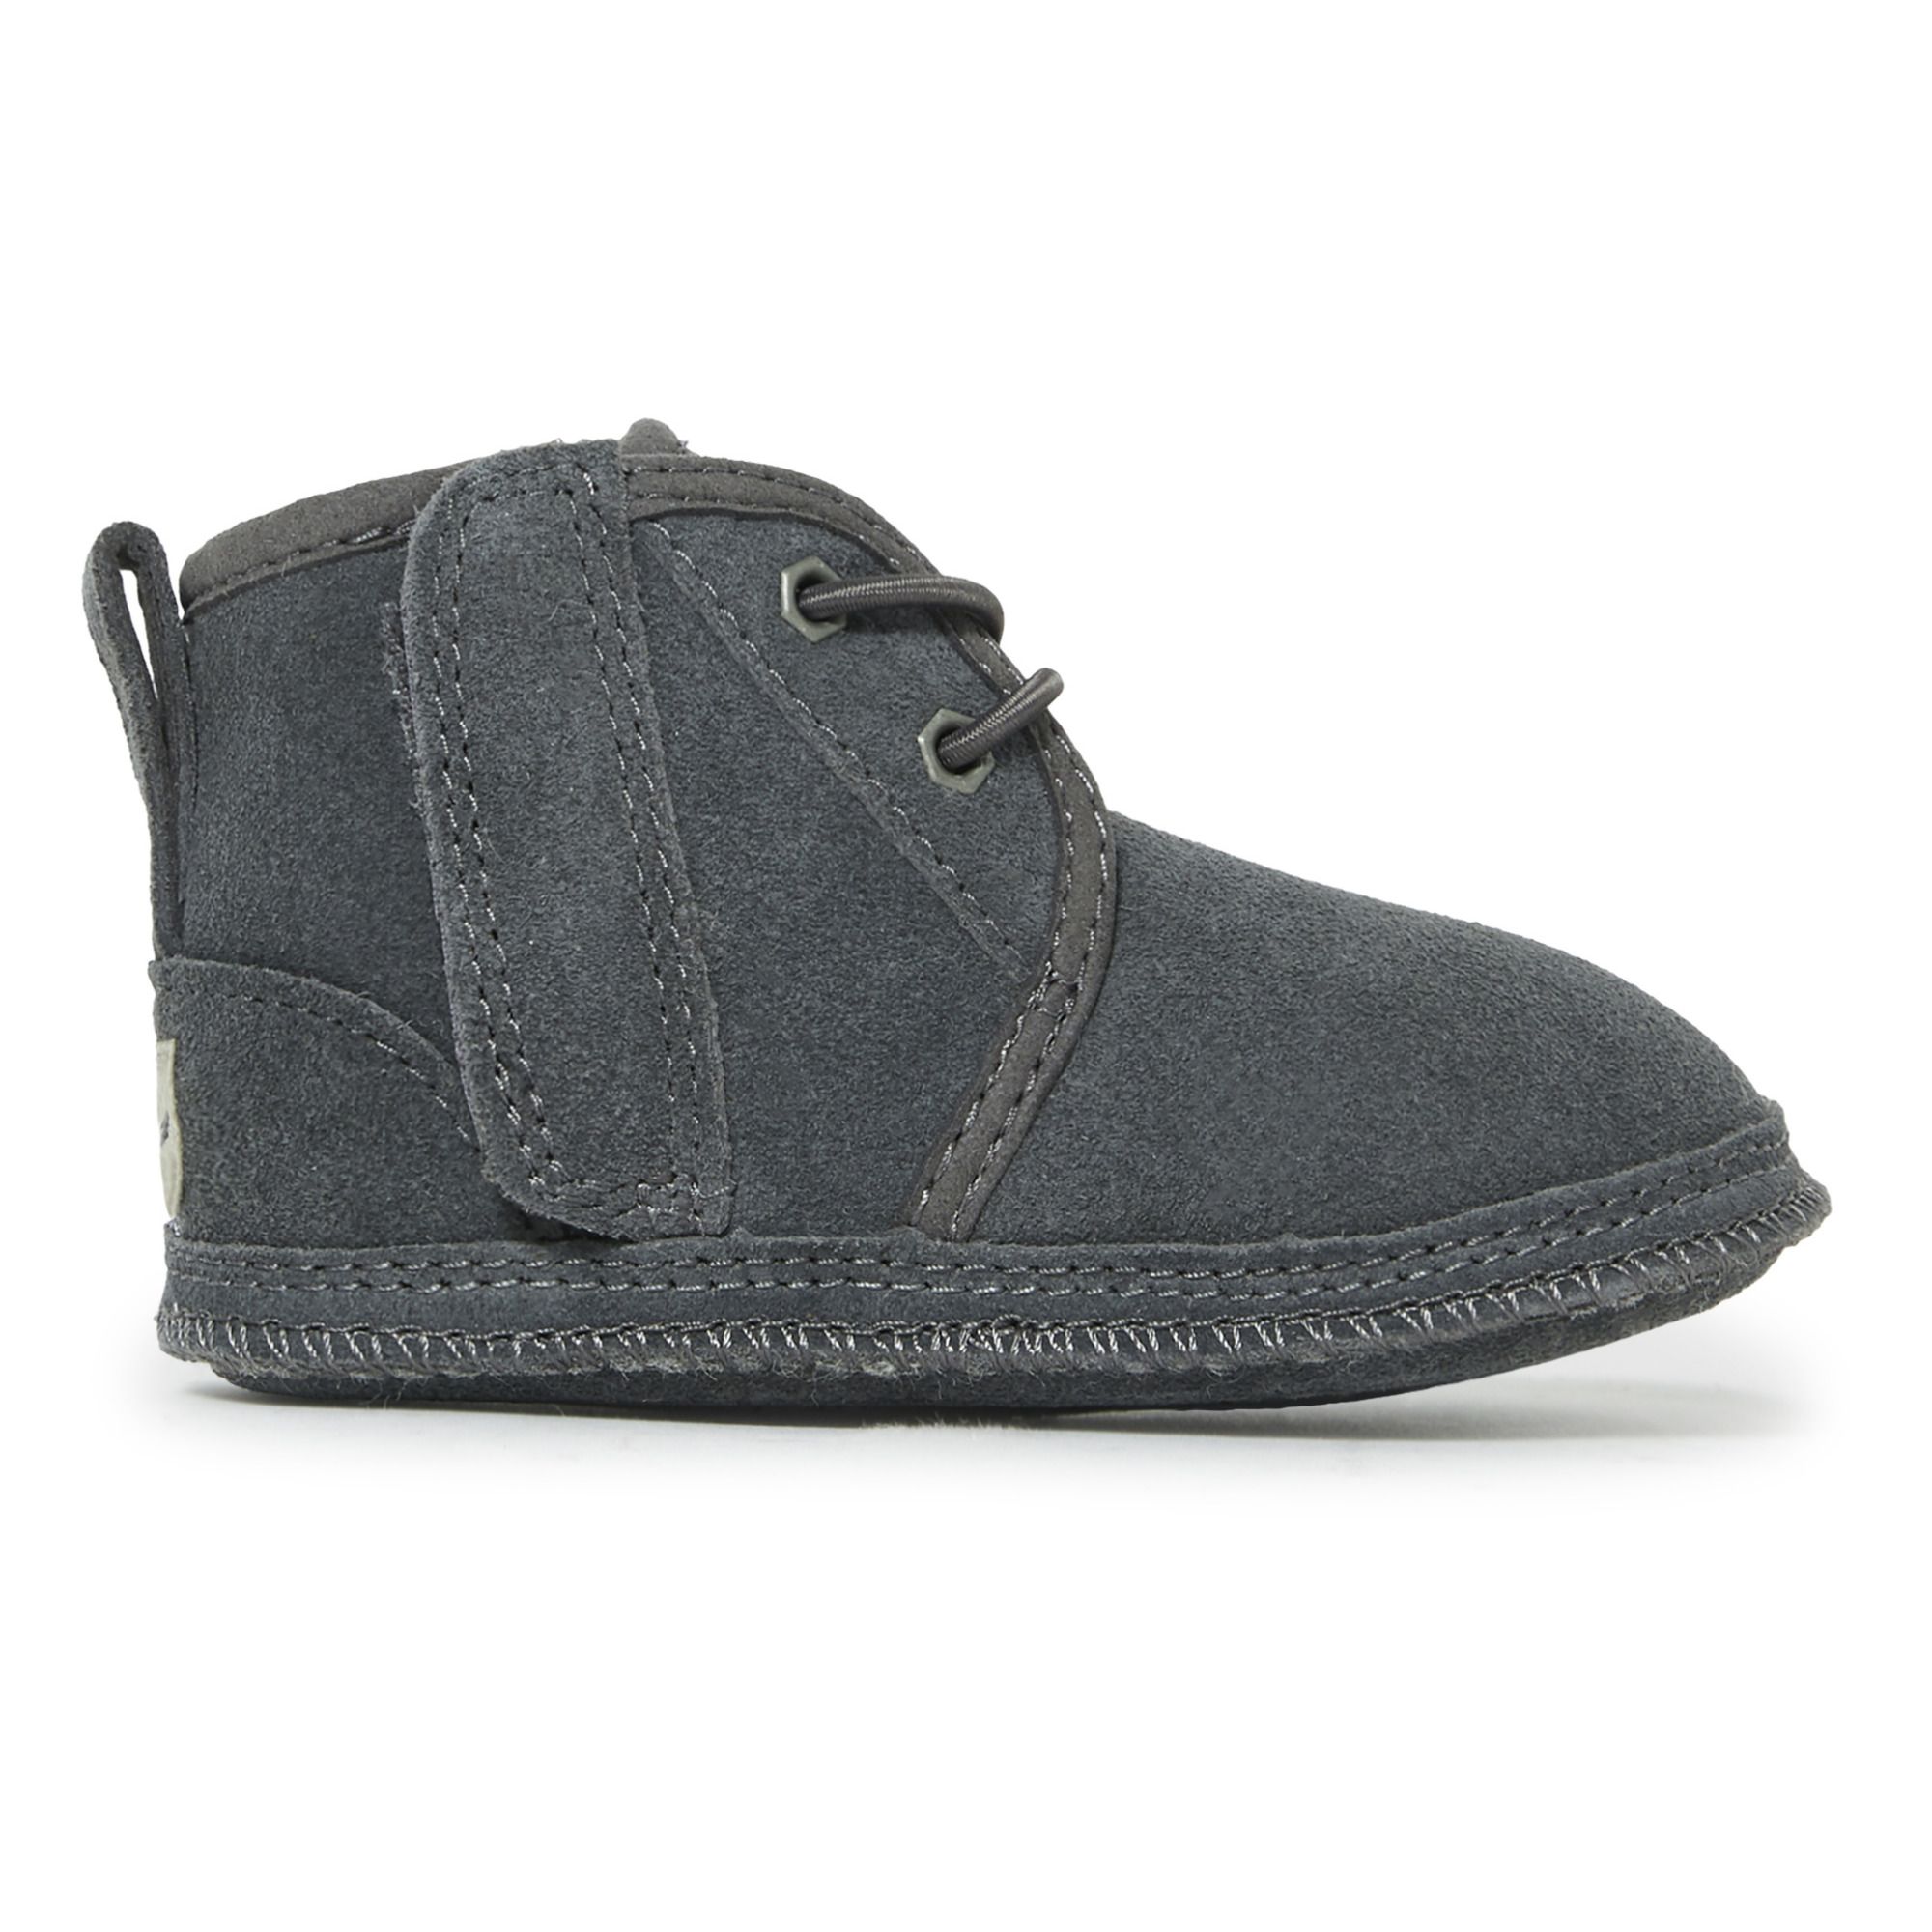 Ugg - Chaussons Neumel - Fille - Gris